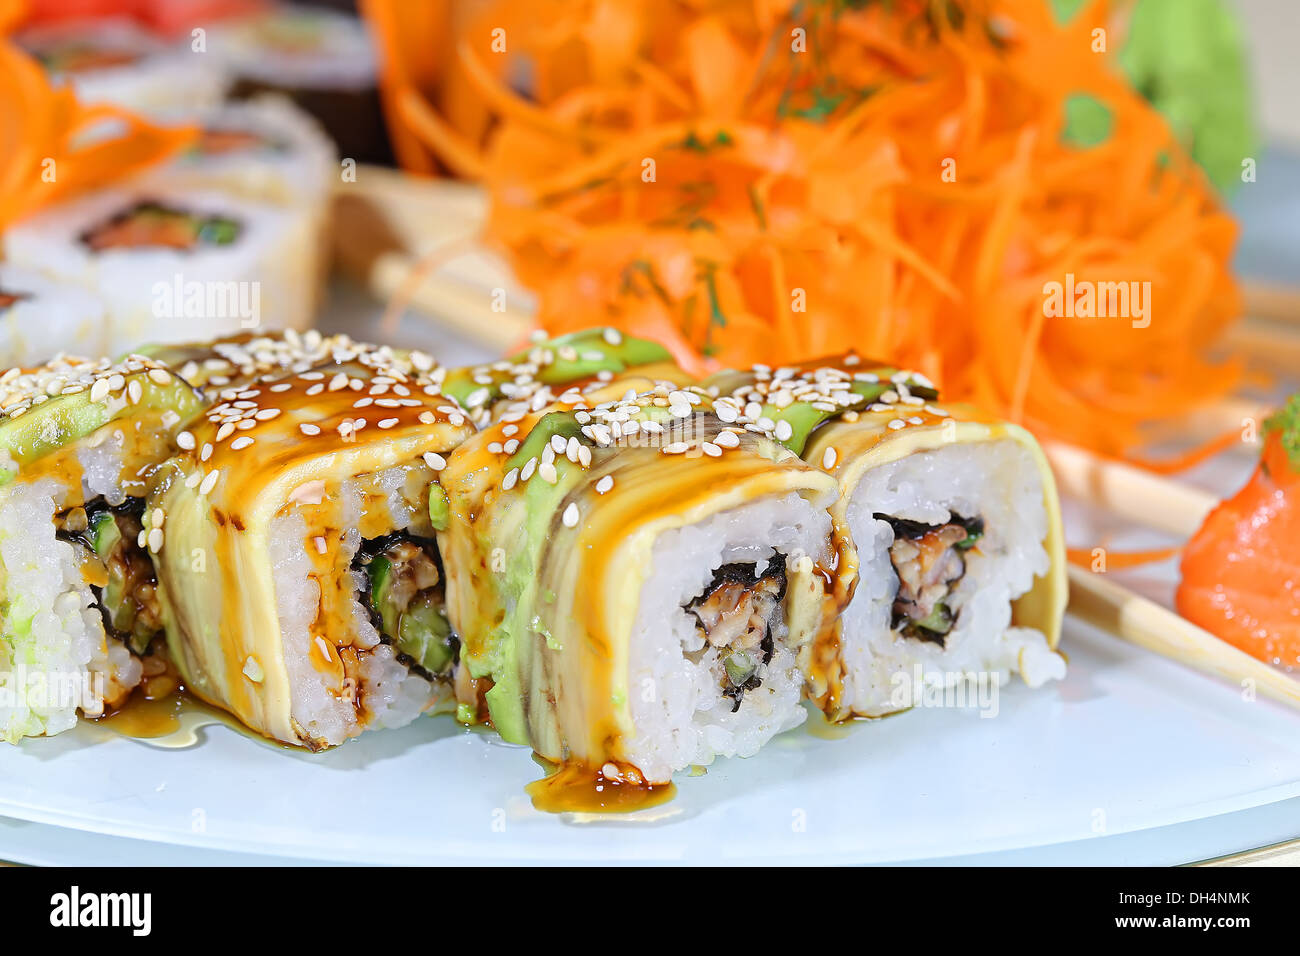 Rolls square with teriyaki sauce and sprinkled with sesame seeds Stock Photo